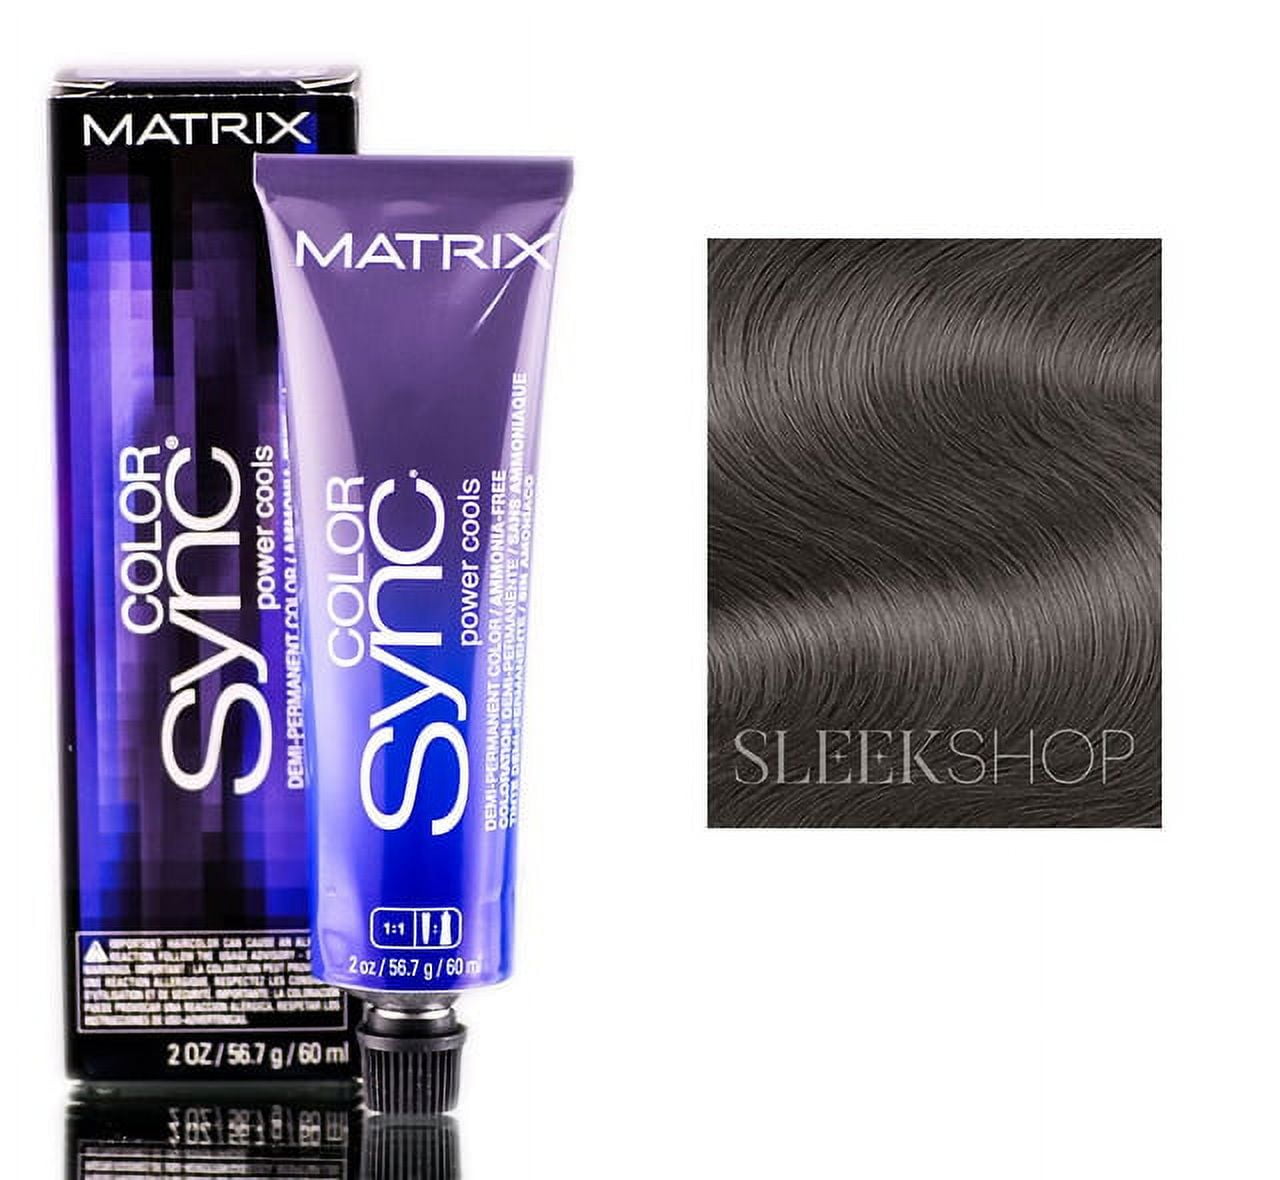 ASH TO BEAT THE - Matrix Professional Hair Color & Care